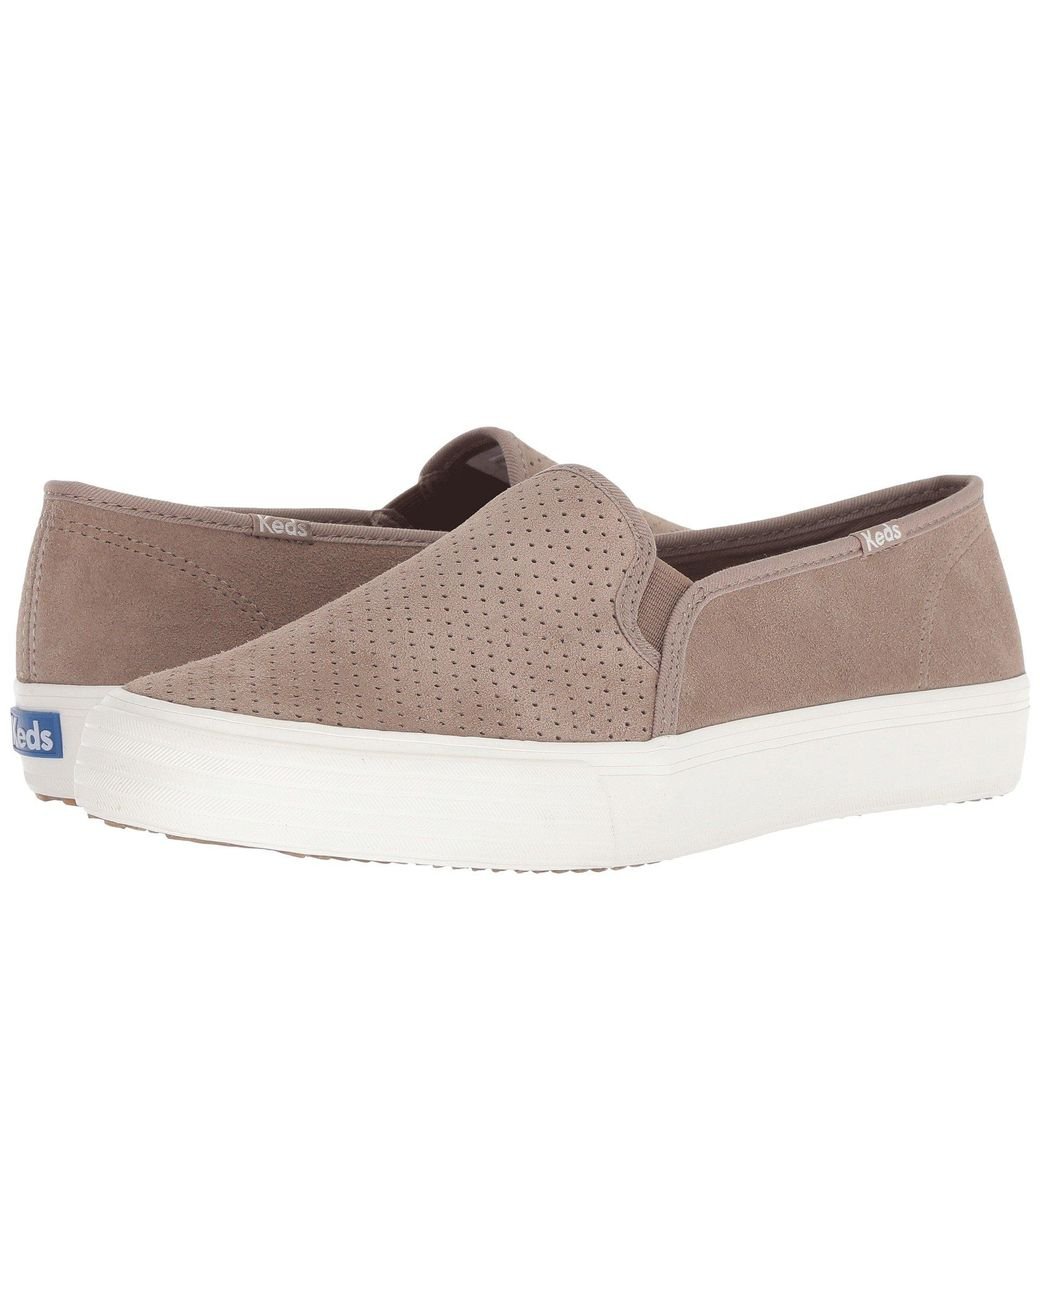 Keds Double Decker Perf Suede - Lyst